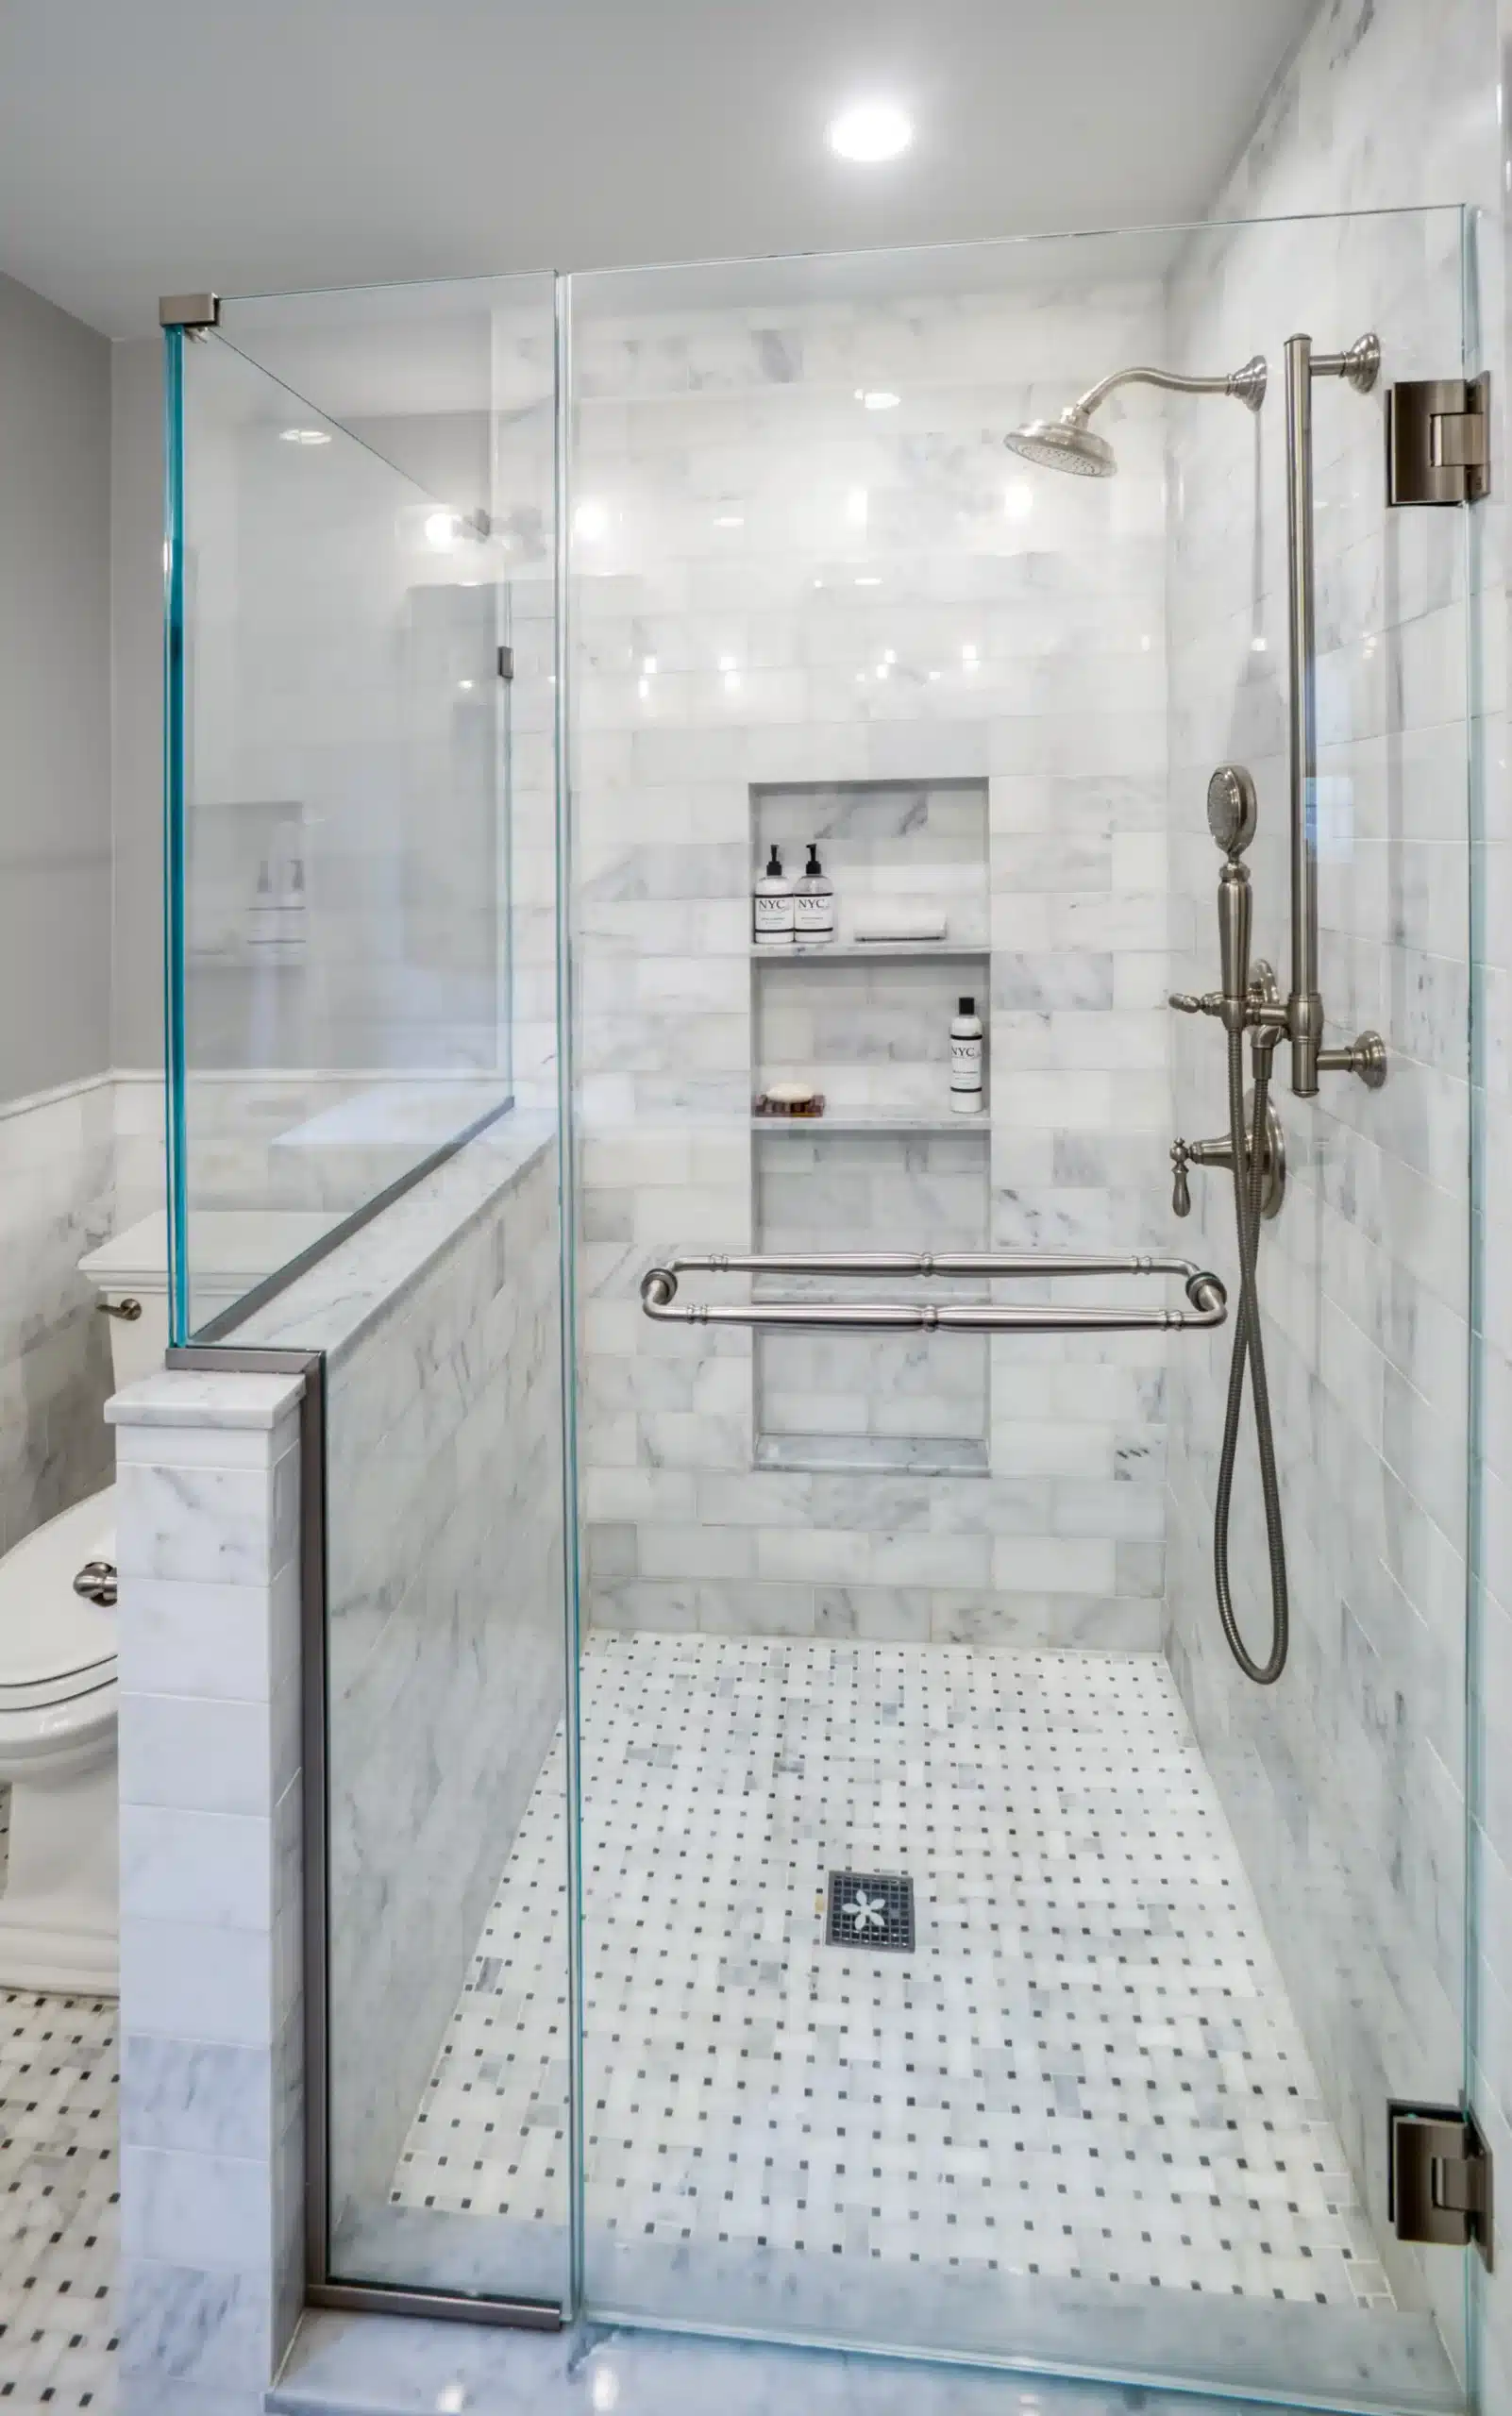 Marble and glass bathroom remodel